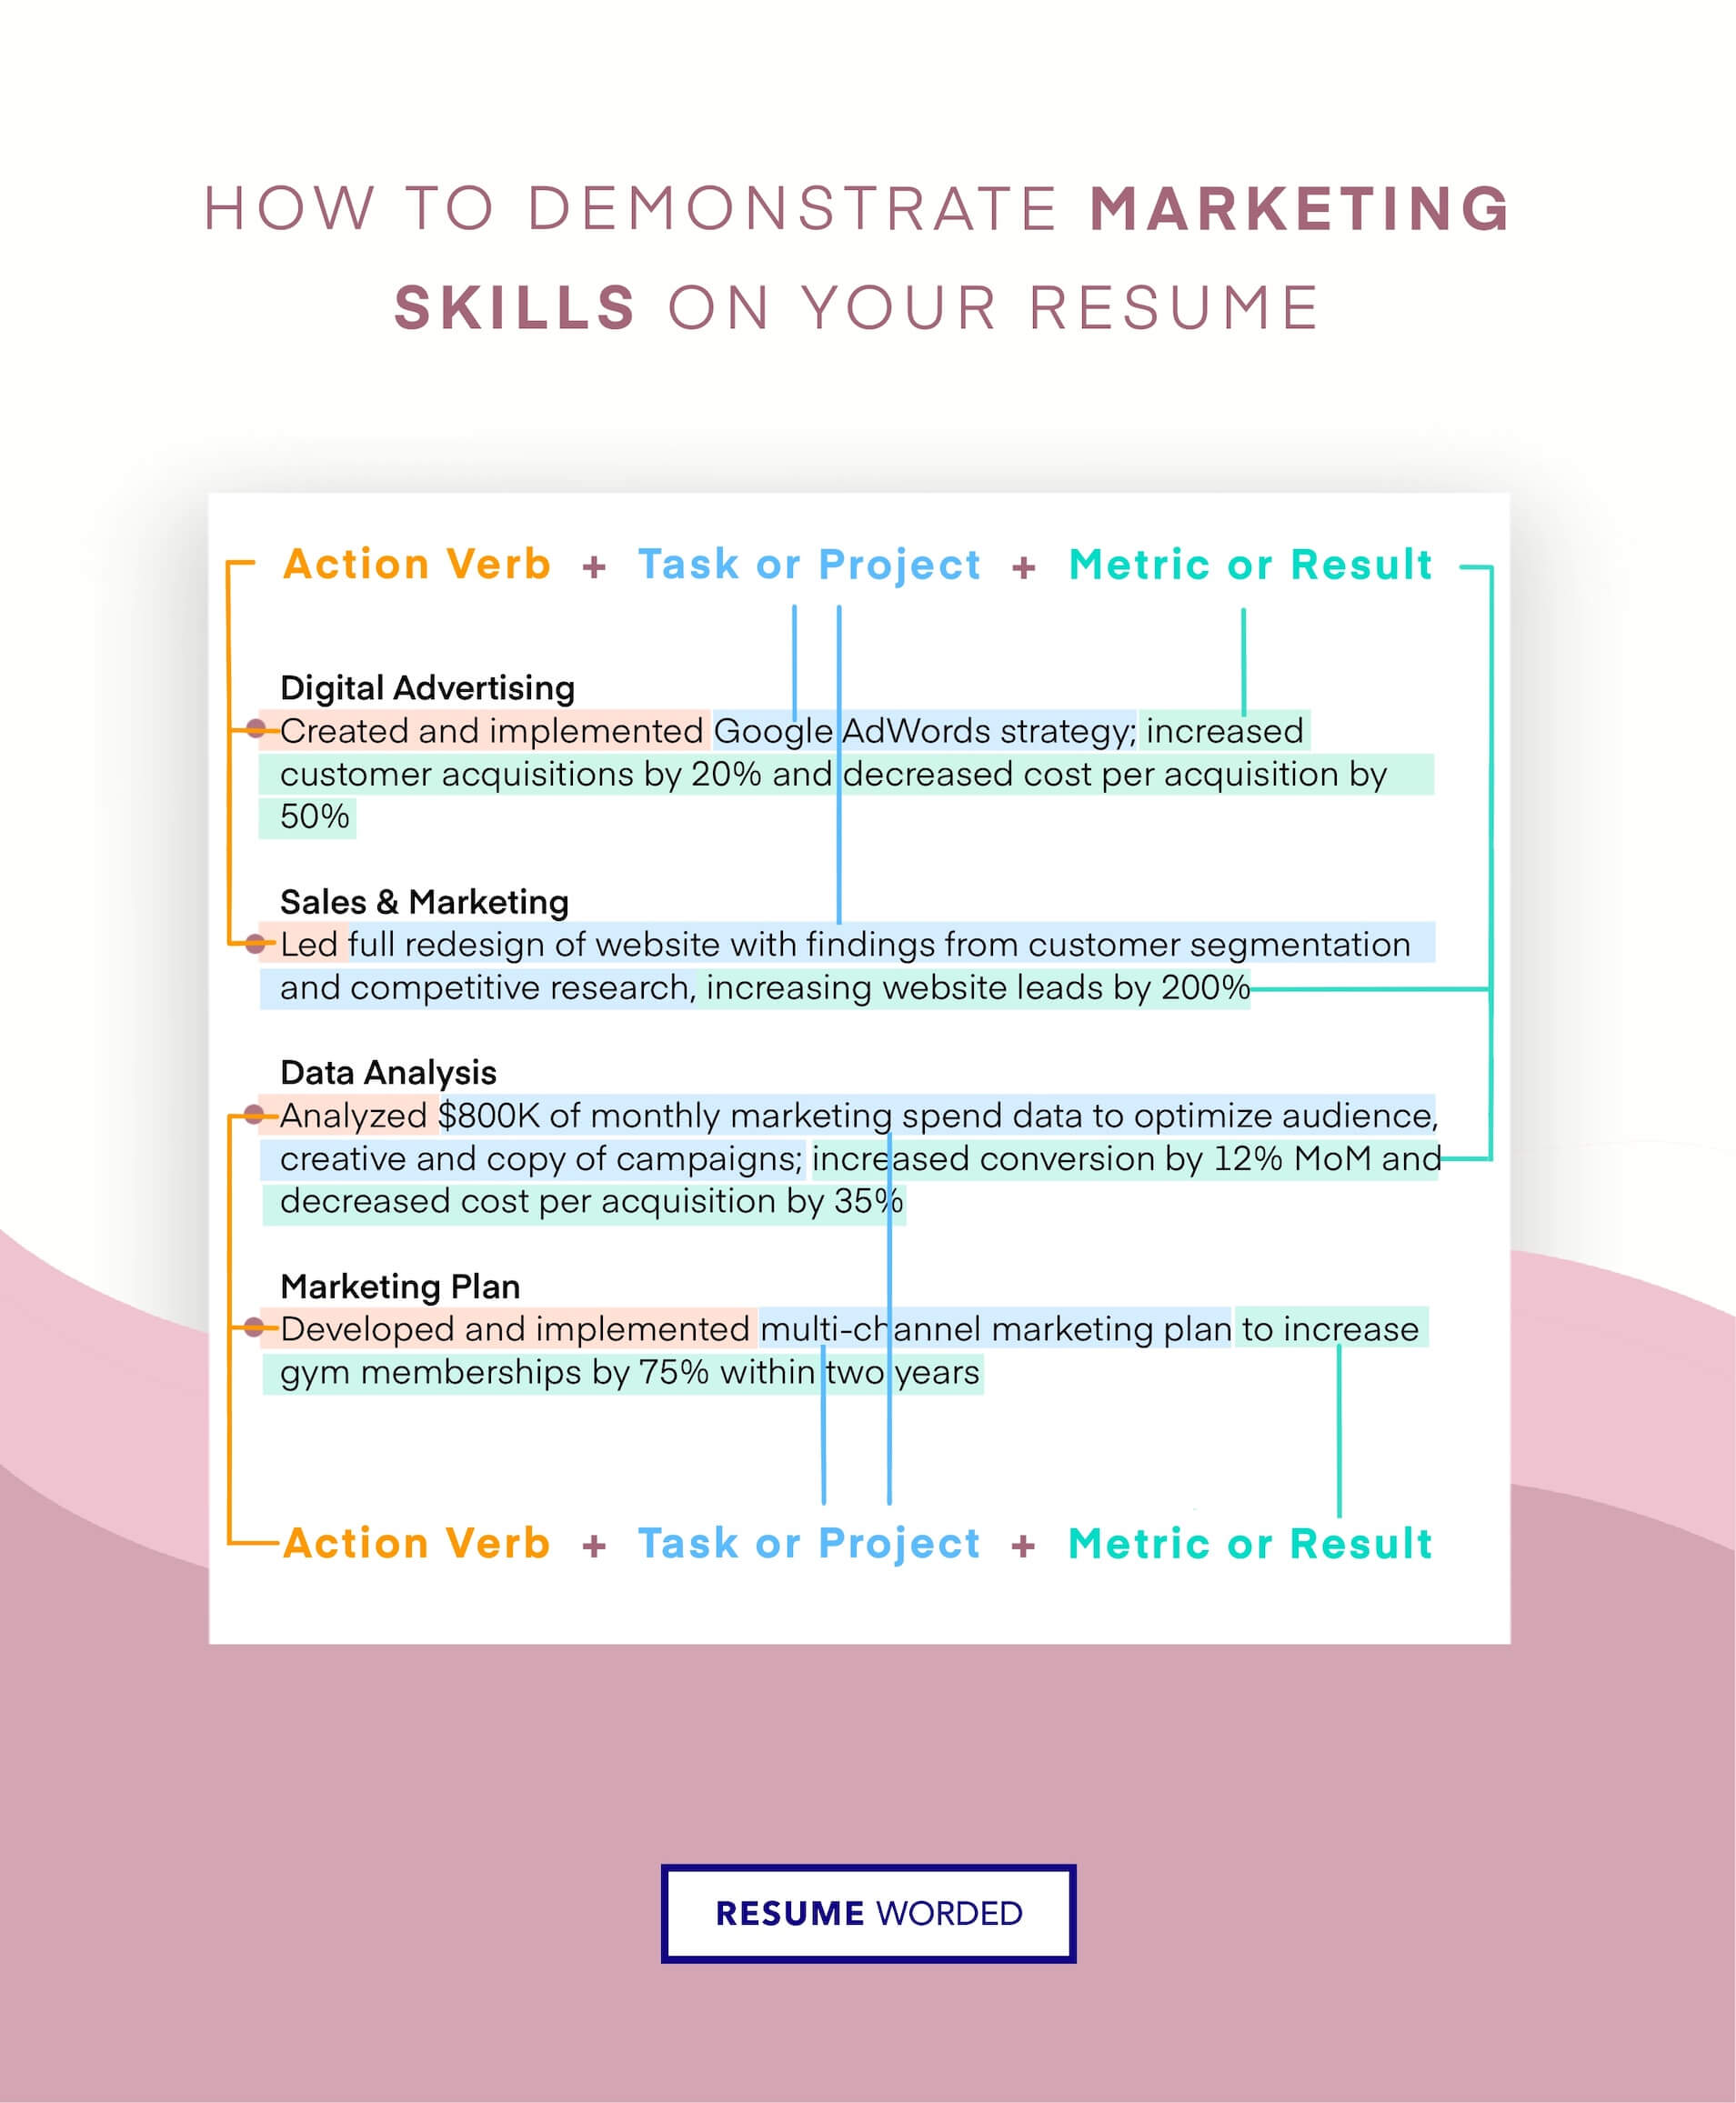 Include digital-marketing-specific skills. - Content Marketing Manager Resume